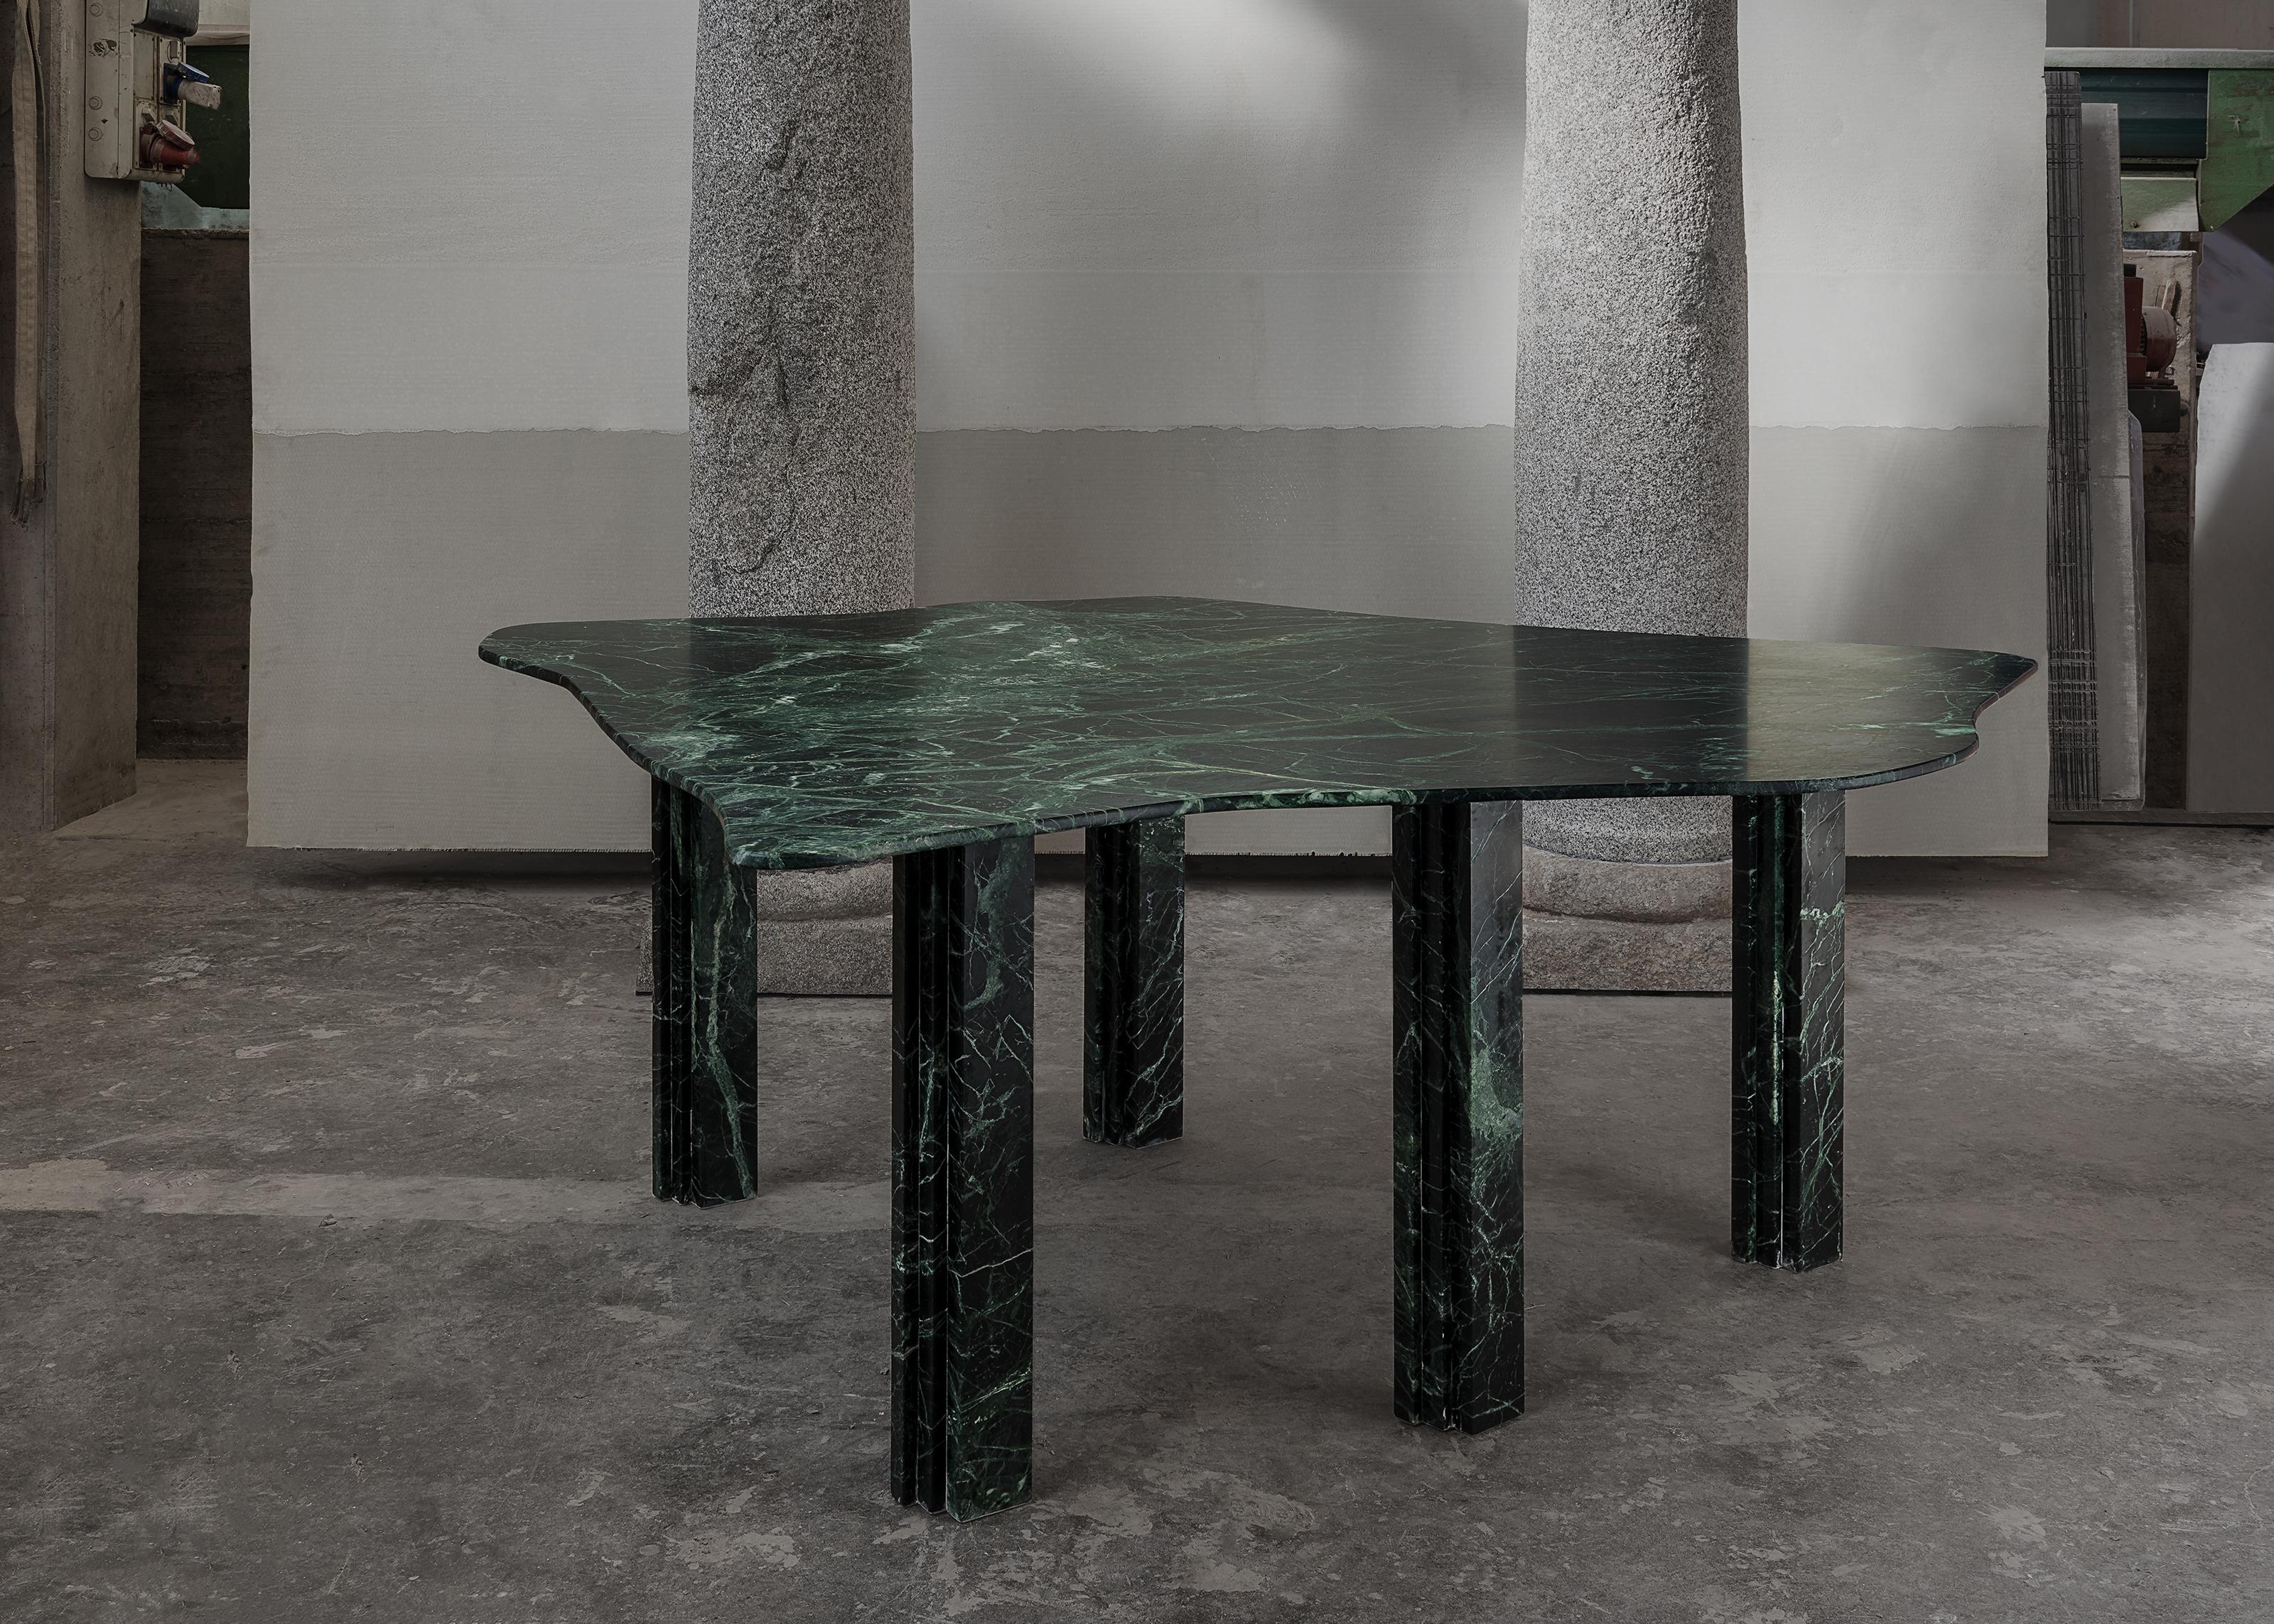 No-thin Sculptural Green Dining Marble Table by Lorenzo Bini 1